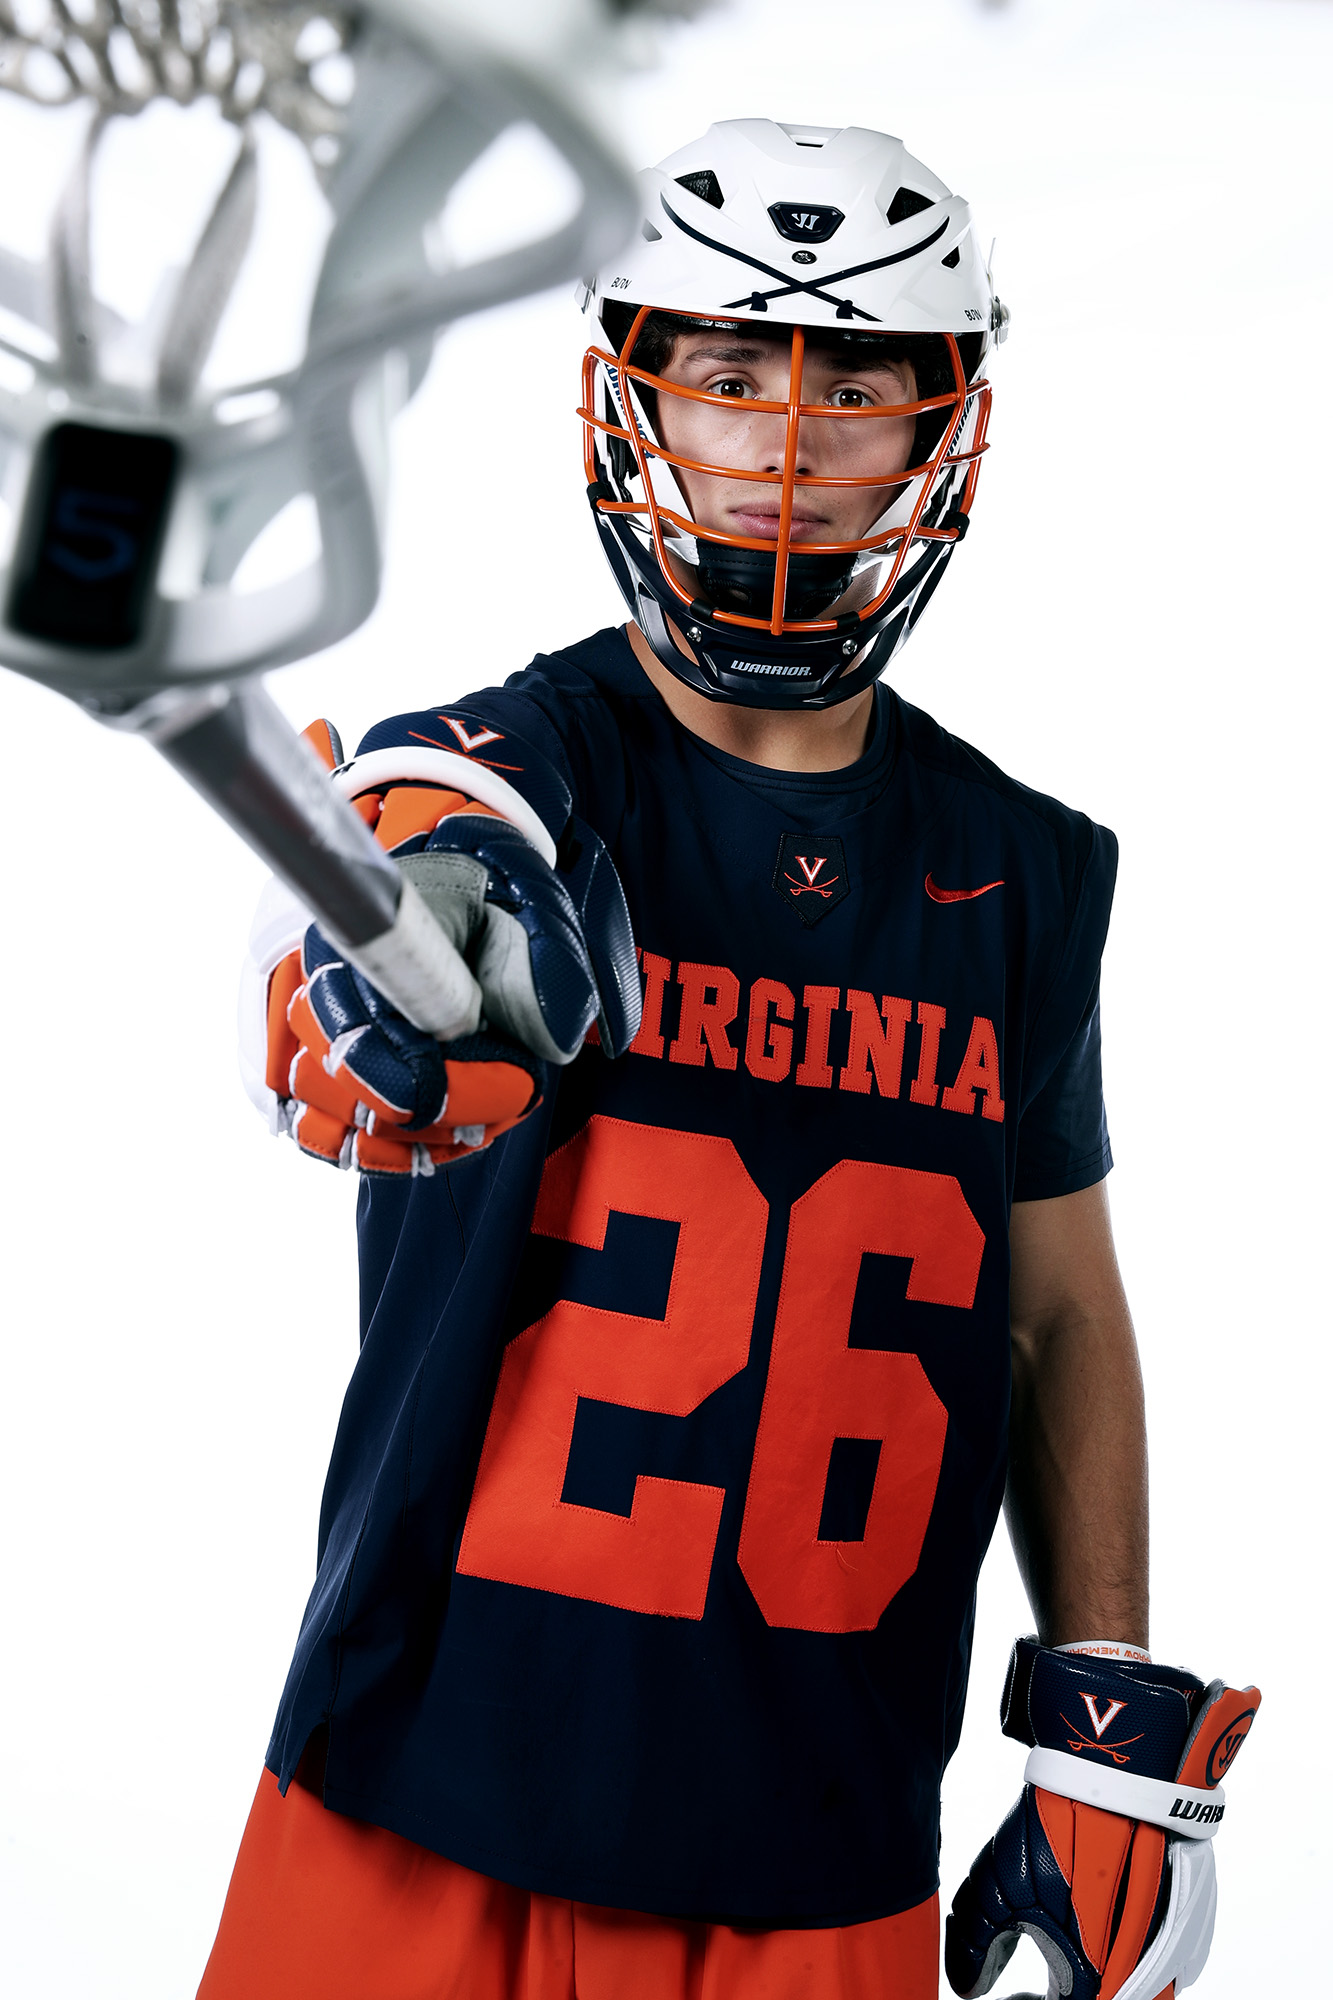 Matt Riley in his Lacrosse Uniform pointing his his lacrosse stick towards the camera